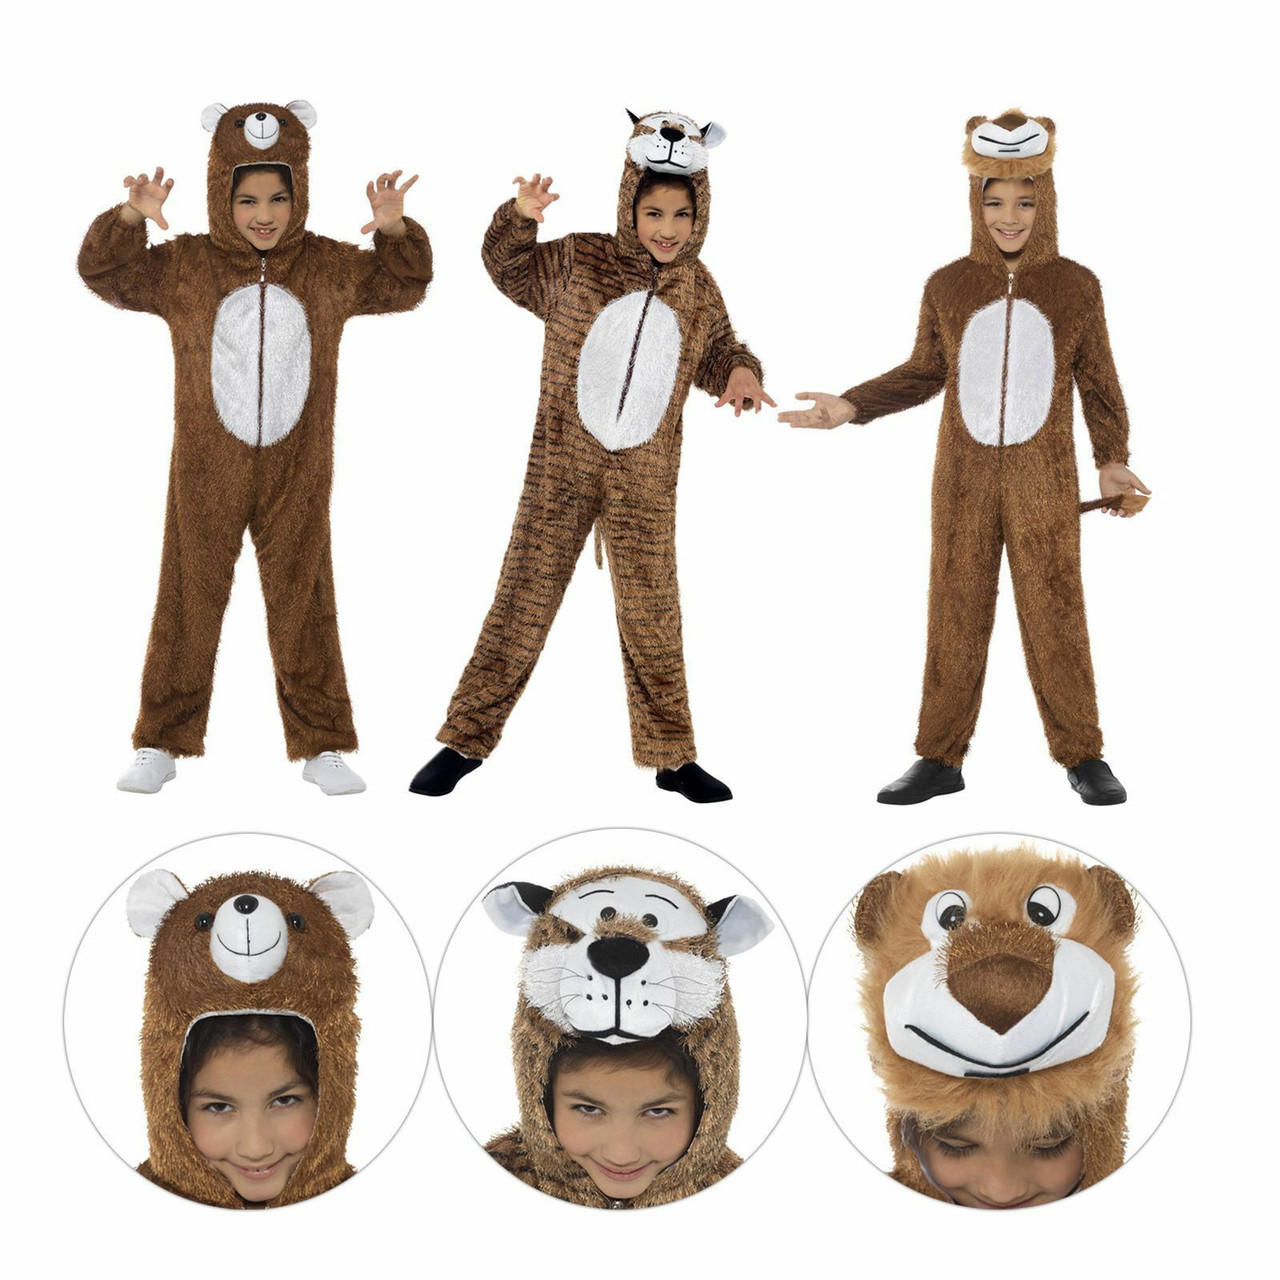 Animal Costumes: Animal Halloween Costumes for Kids & Adults | Tipsy Elves